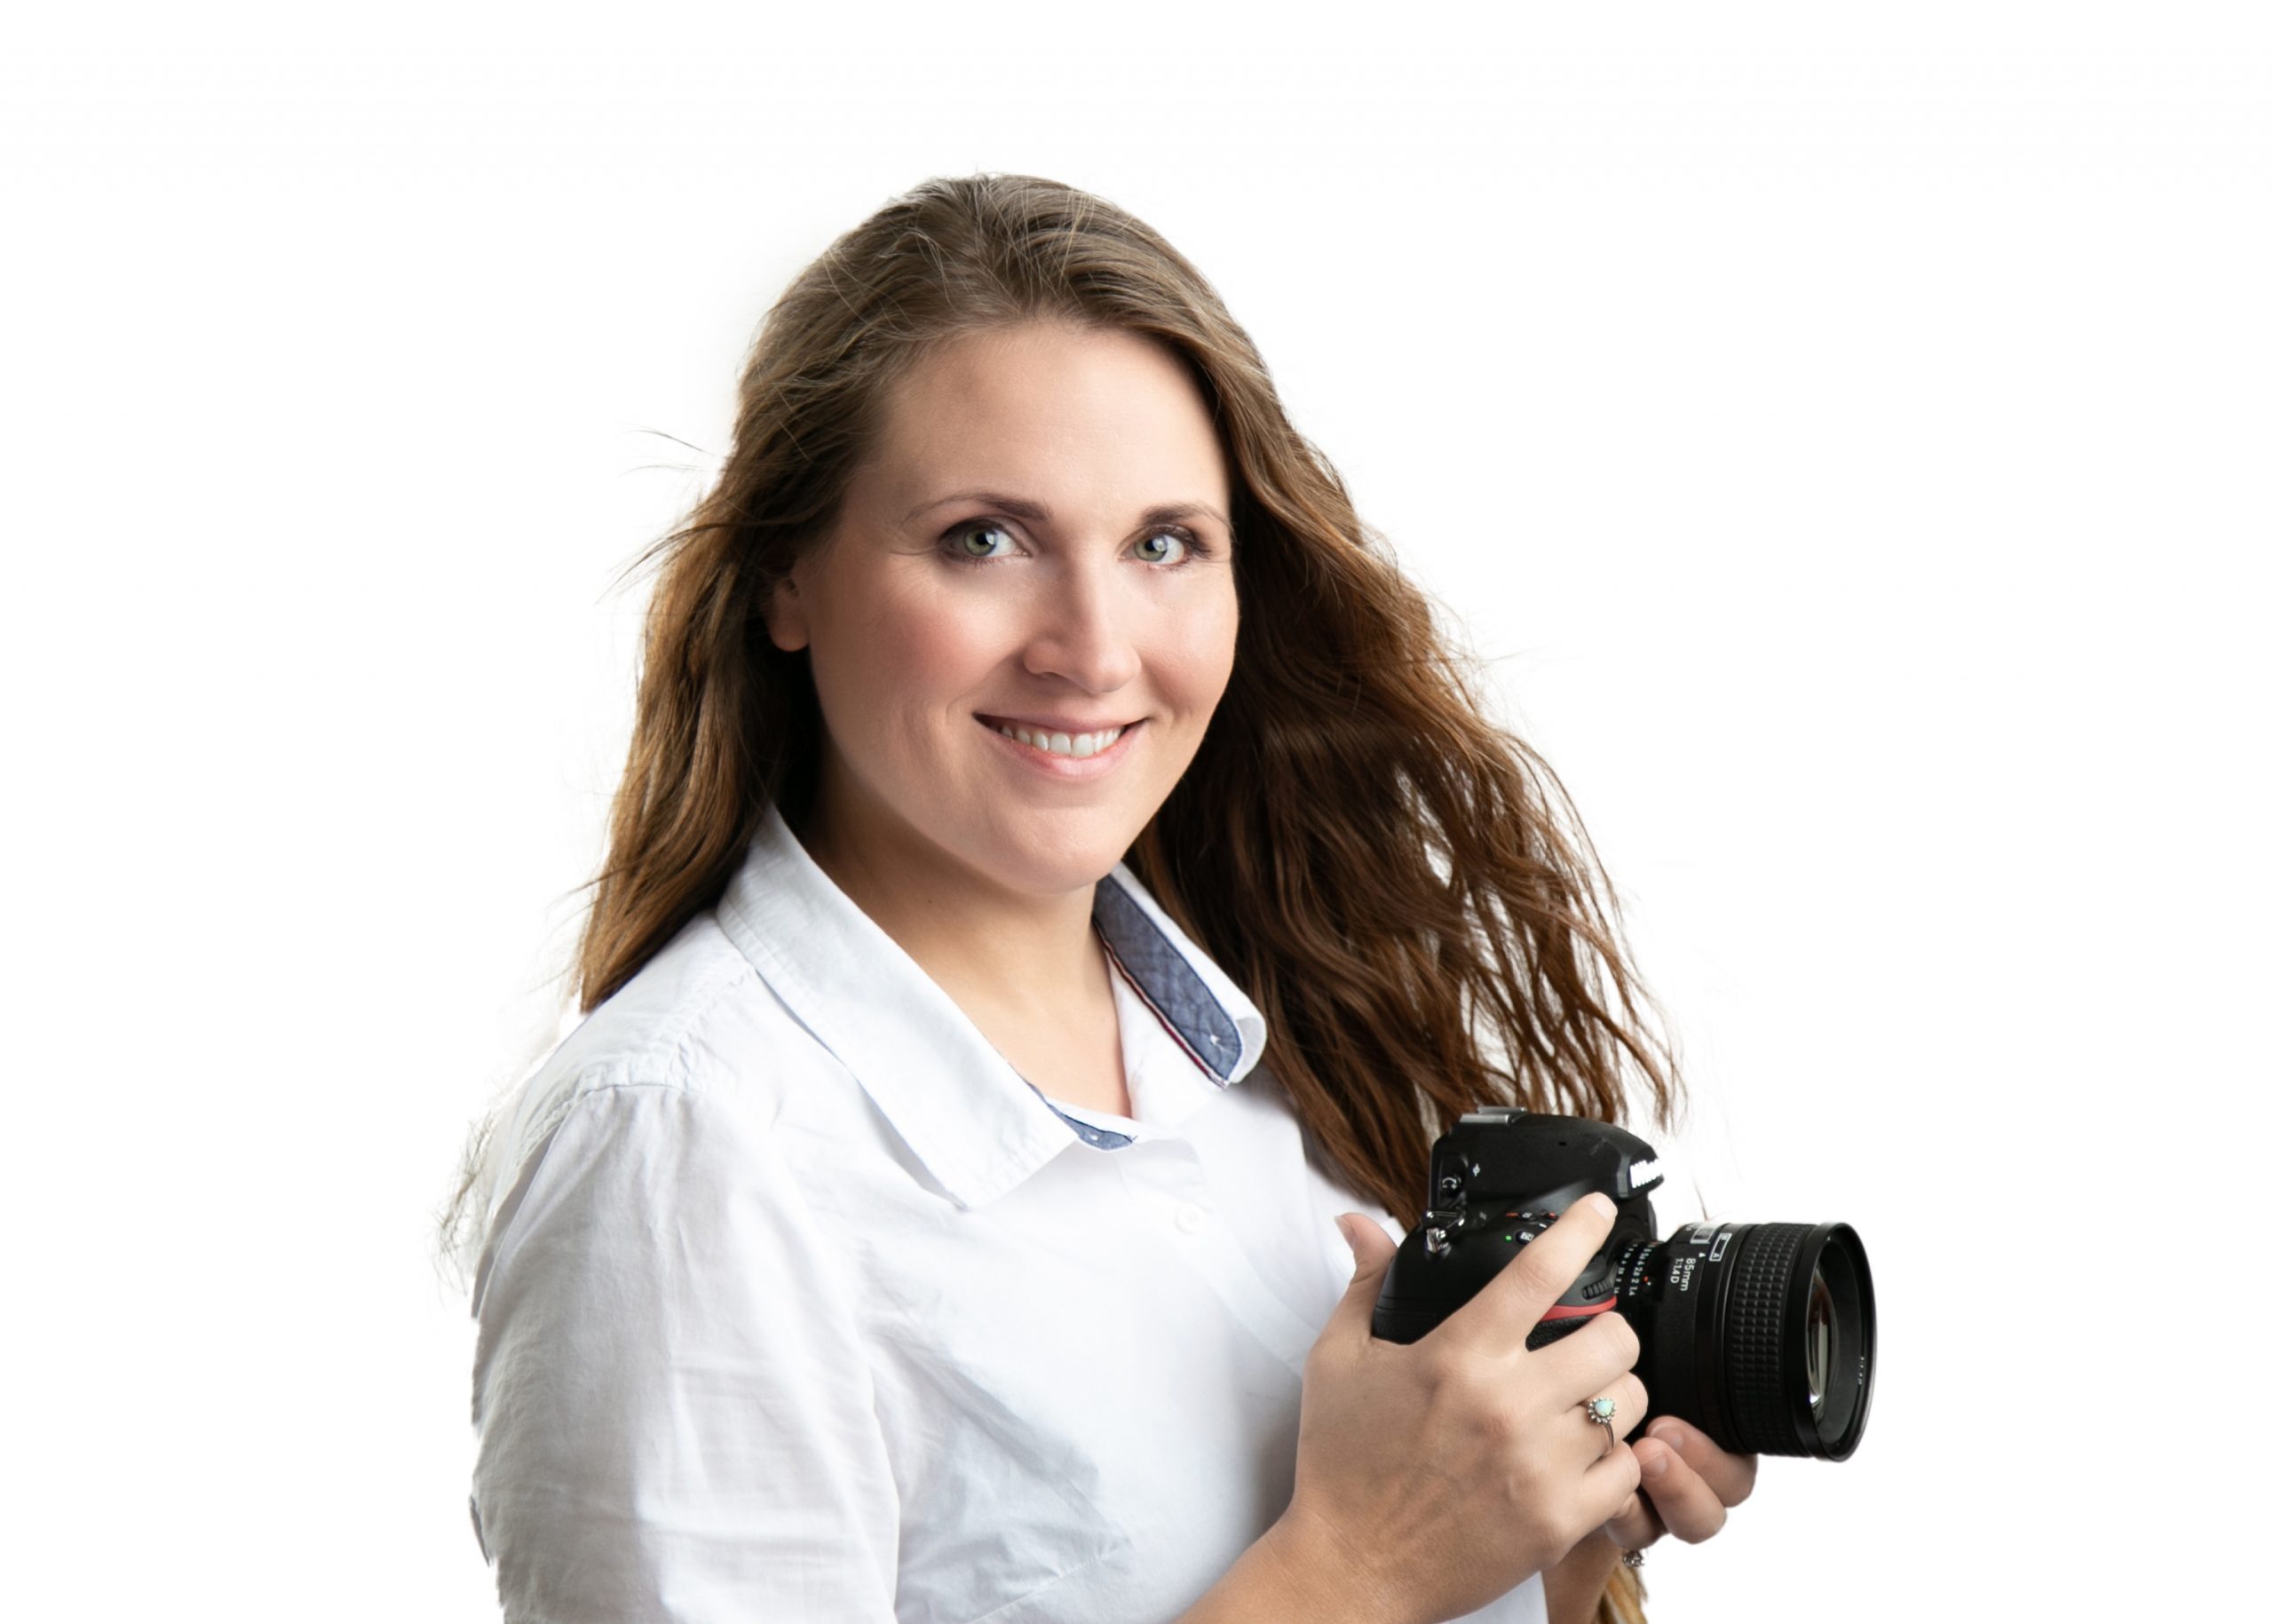 headshot of woman in white shirt holding a camera